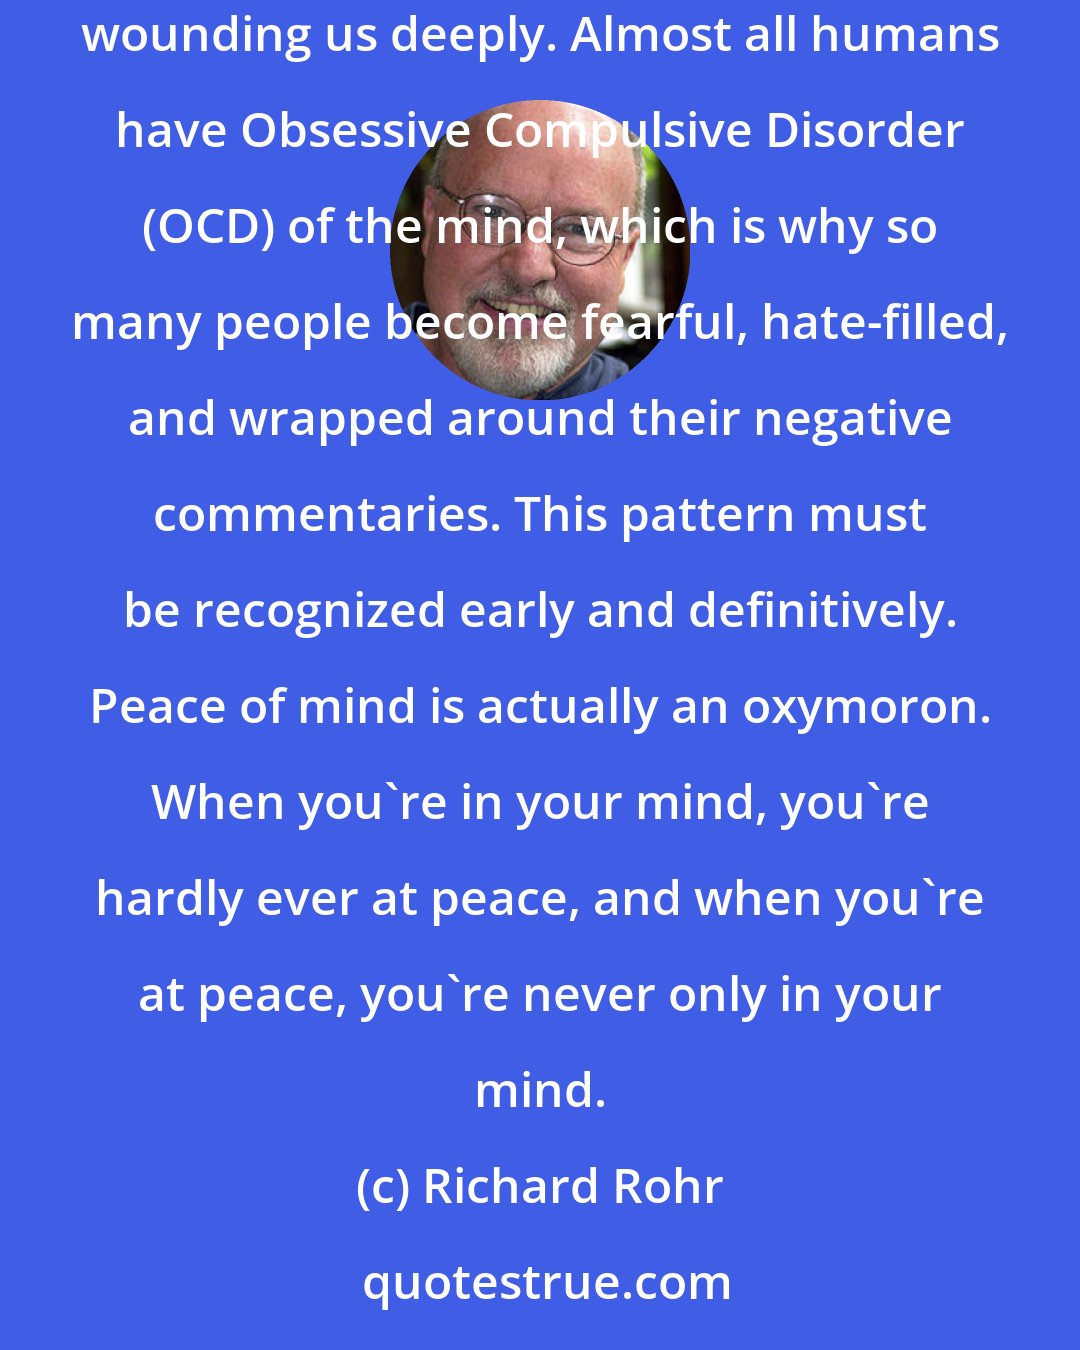 Richard Rohr: Notice that whenever we suffer pain, the mind is always quick to identify with the negative aspects of things and replay them over and over again, wounding us deeply. Almost all humans have Obsessive Compulsive Disorder (OCD) of the mind, which is why so many people become fearful, hate-filled, and wrapped around their negative commentaries. This pattern must be recognized early and definitively. Peace of mind is actually an oxymoron. When you're in your mind, you're hardly ever at peace, and when you're at peace, you're never only in your mind.